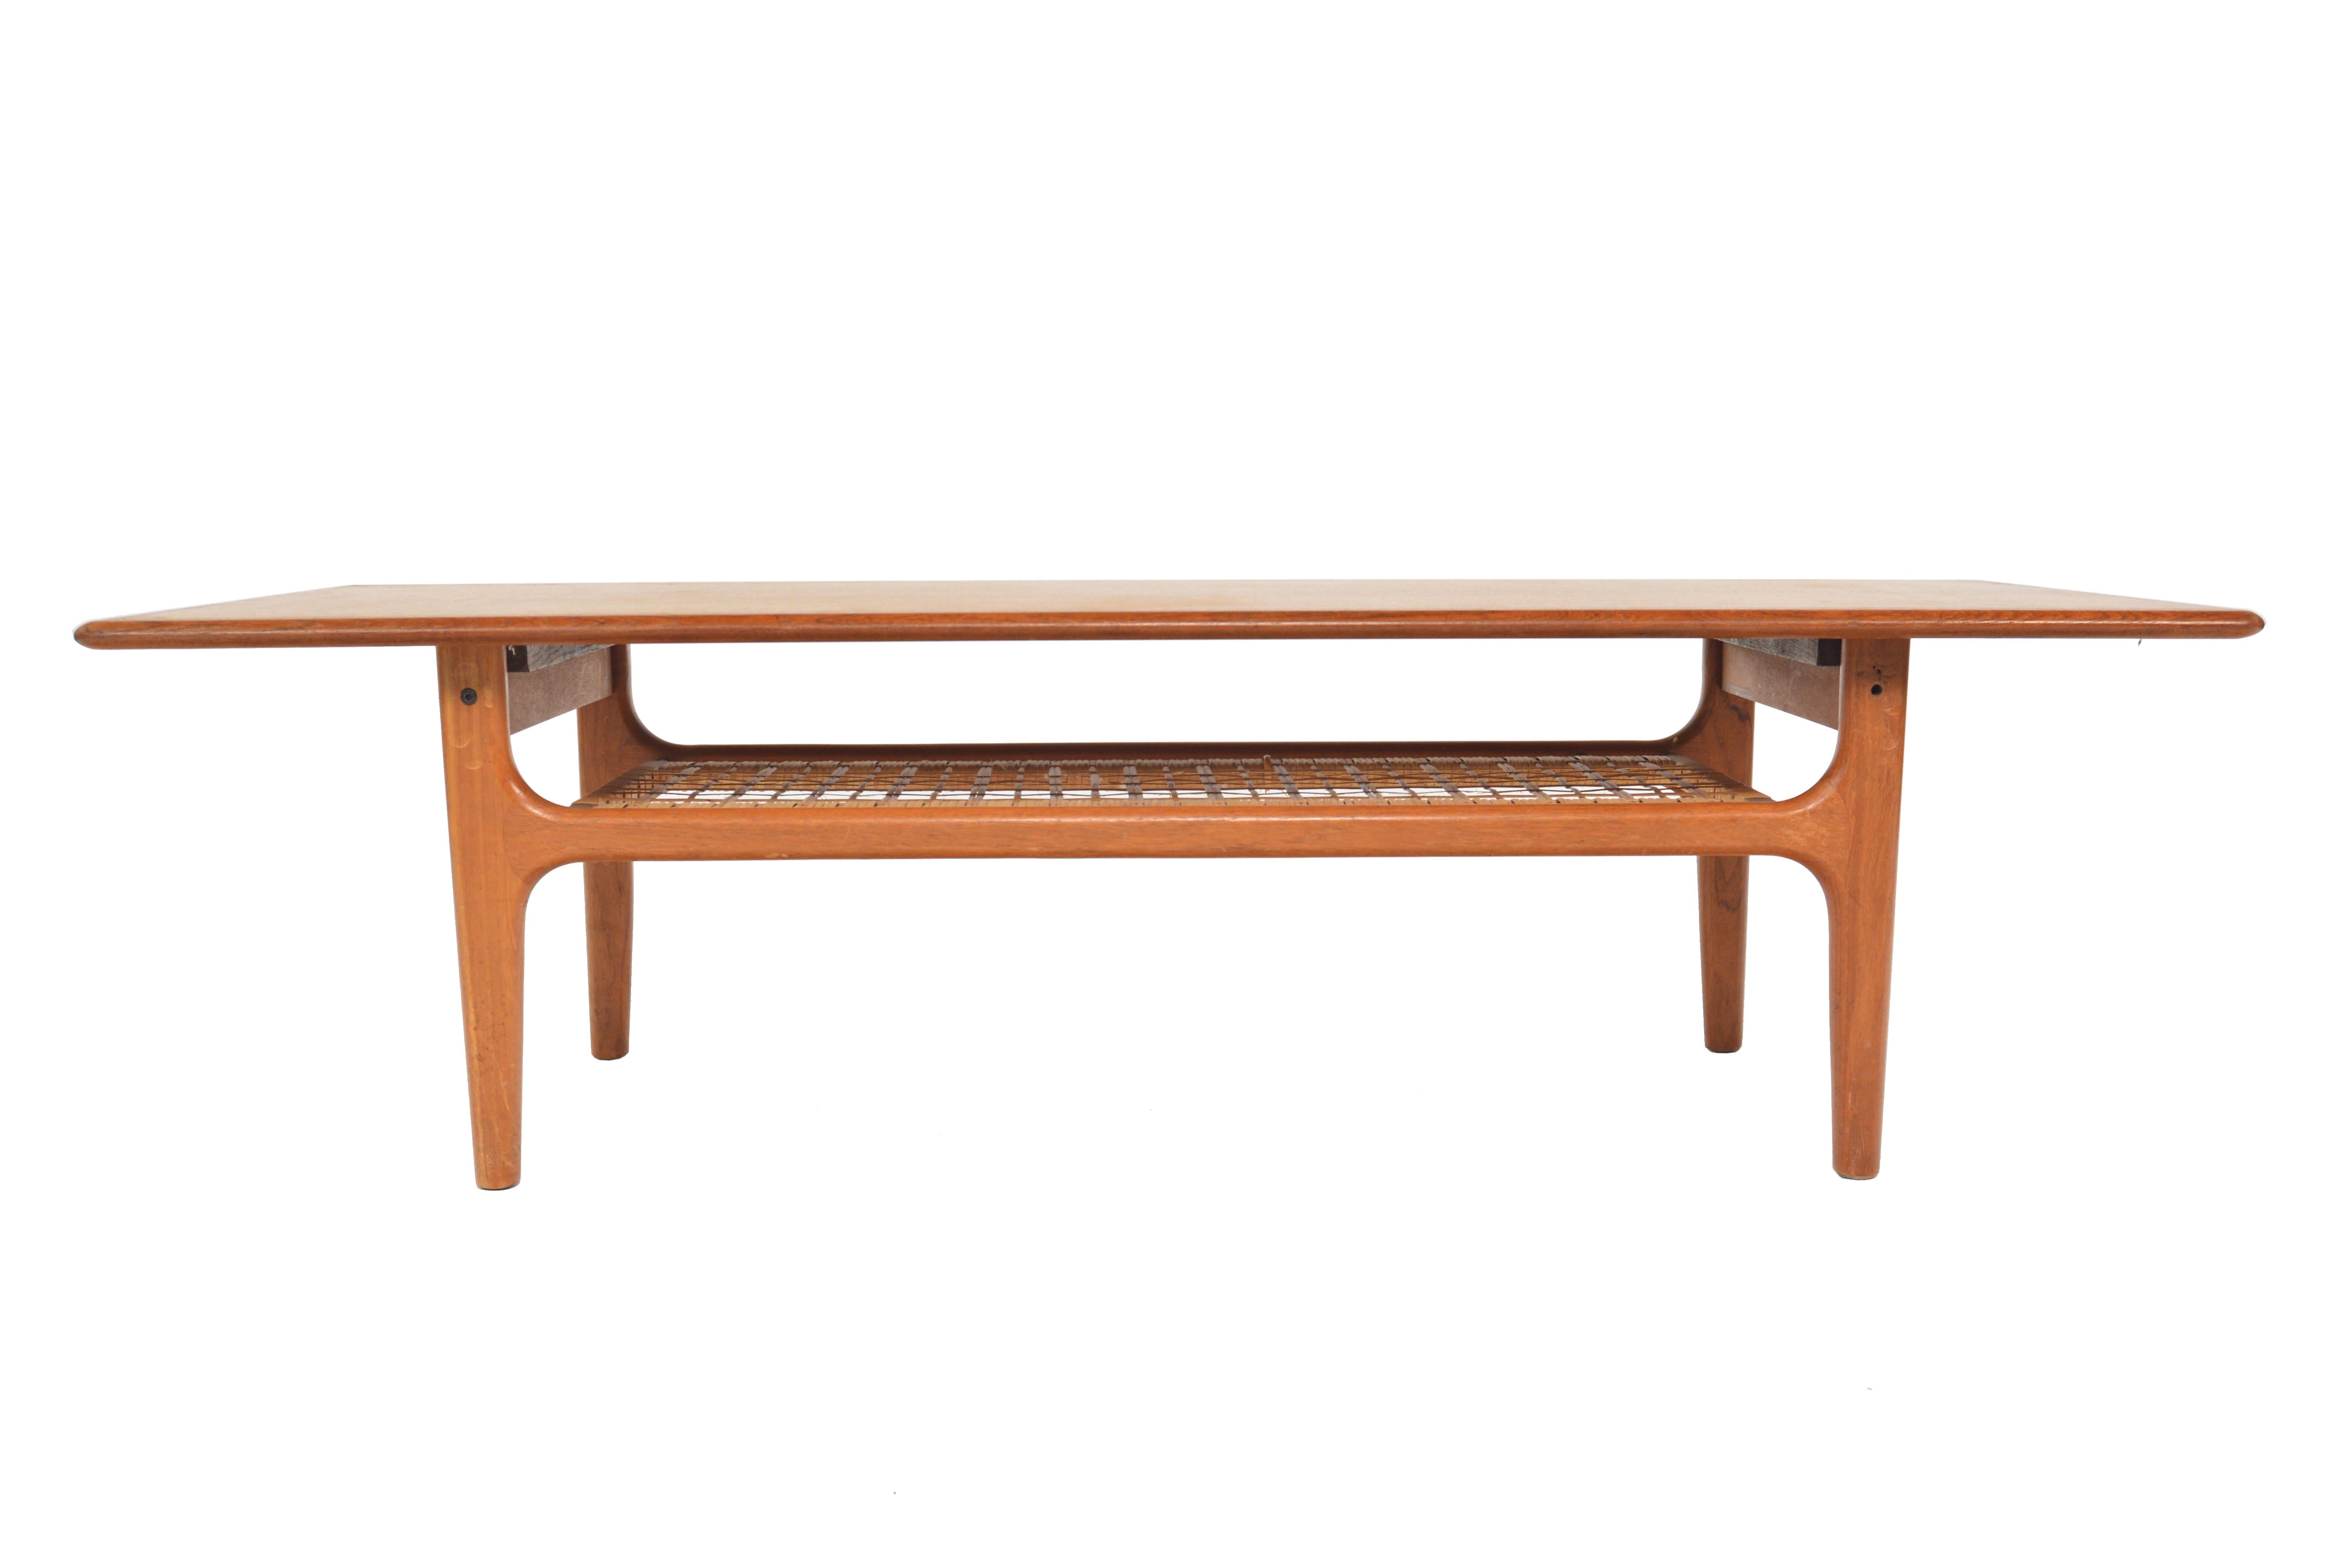 This Danish modern midcentury surfboard coffee table in teak by Trioh is beautifully designed. The rectangular teak slab features a softly sculpted banding. An original cane rack underneath the table offers storage. In excellent original